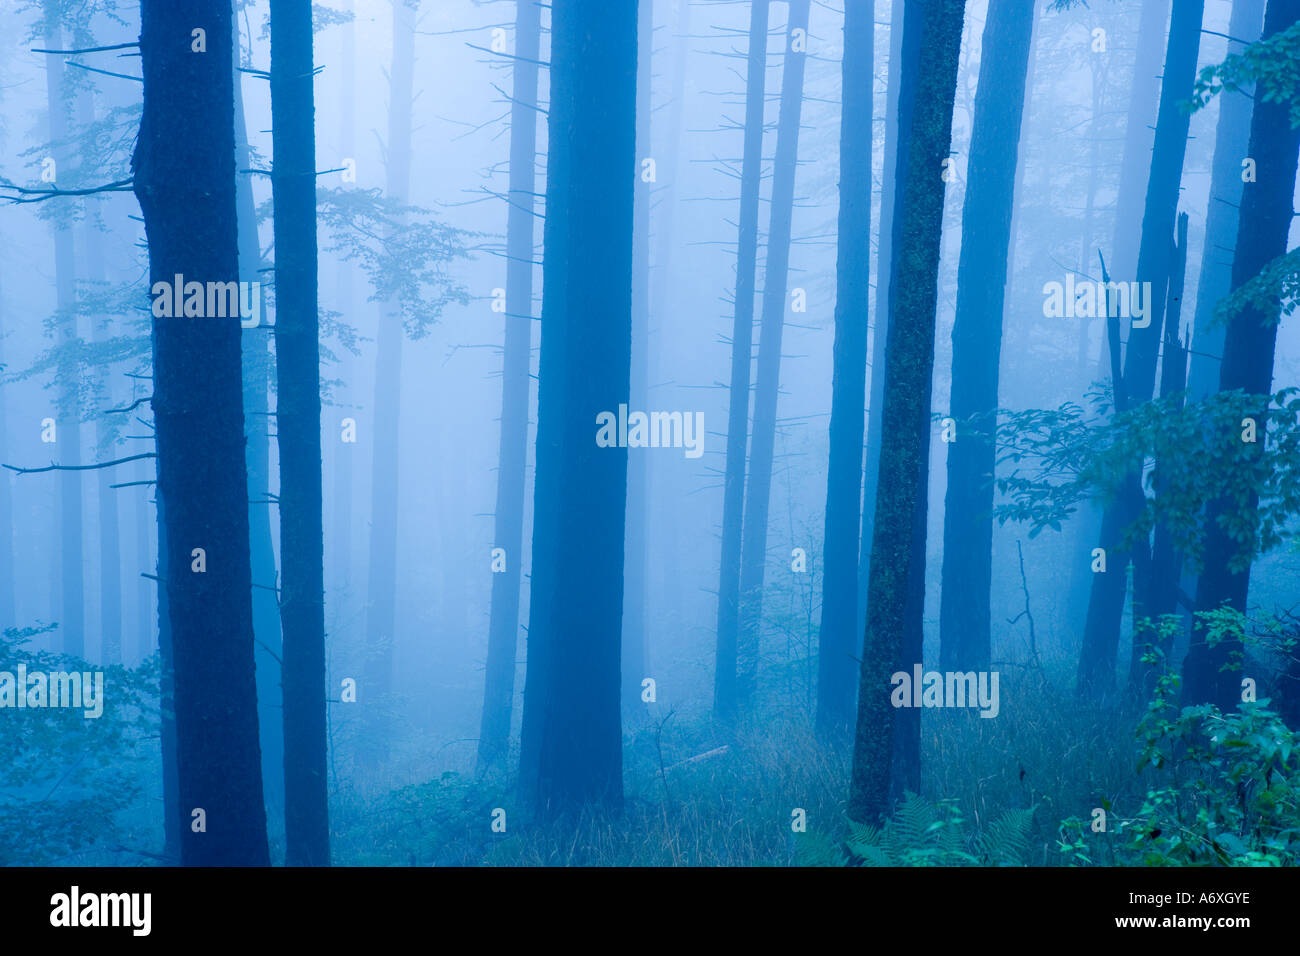 UK Hampshire New forest Pine trees in mist Stock Photo